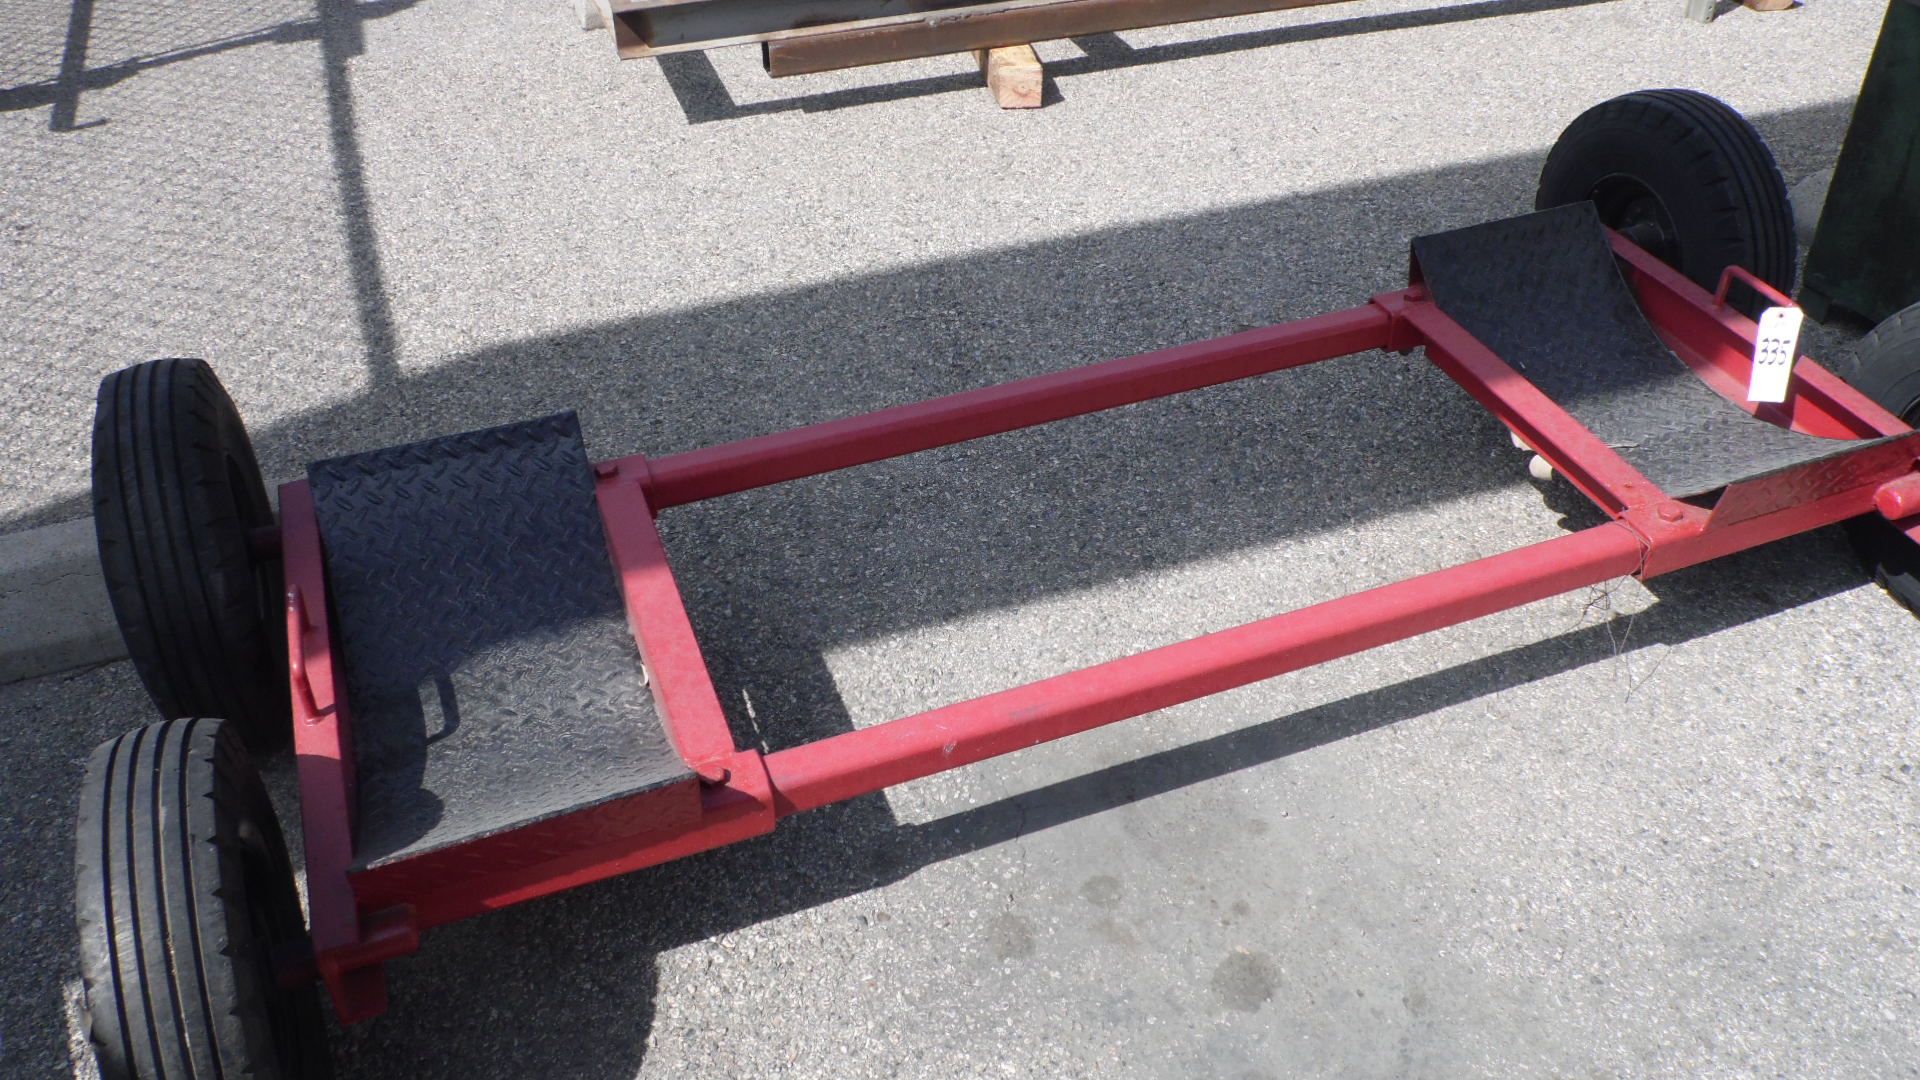 RED 4 WHEEL DOLLY